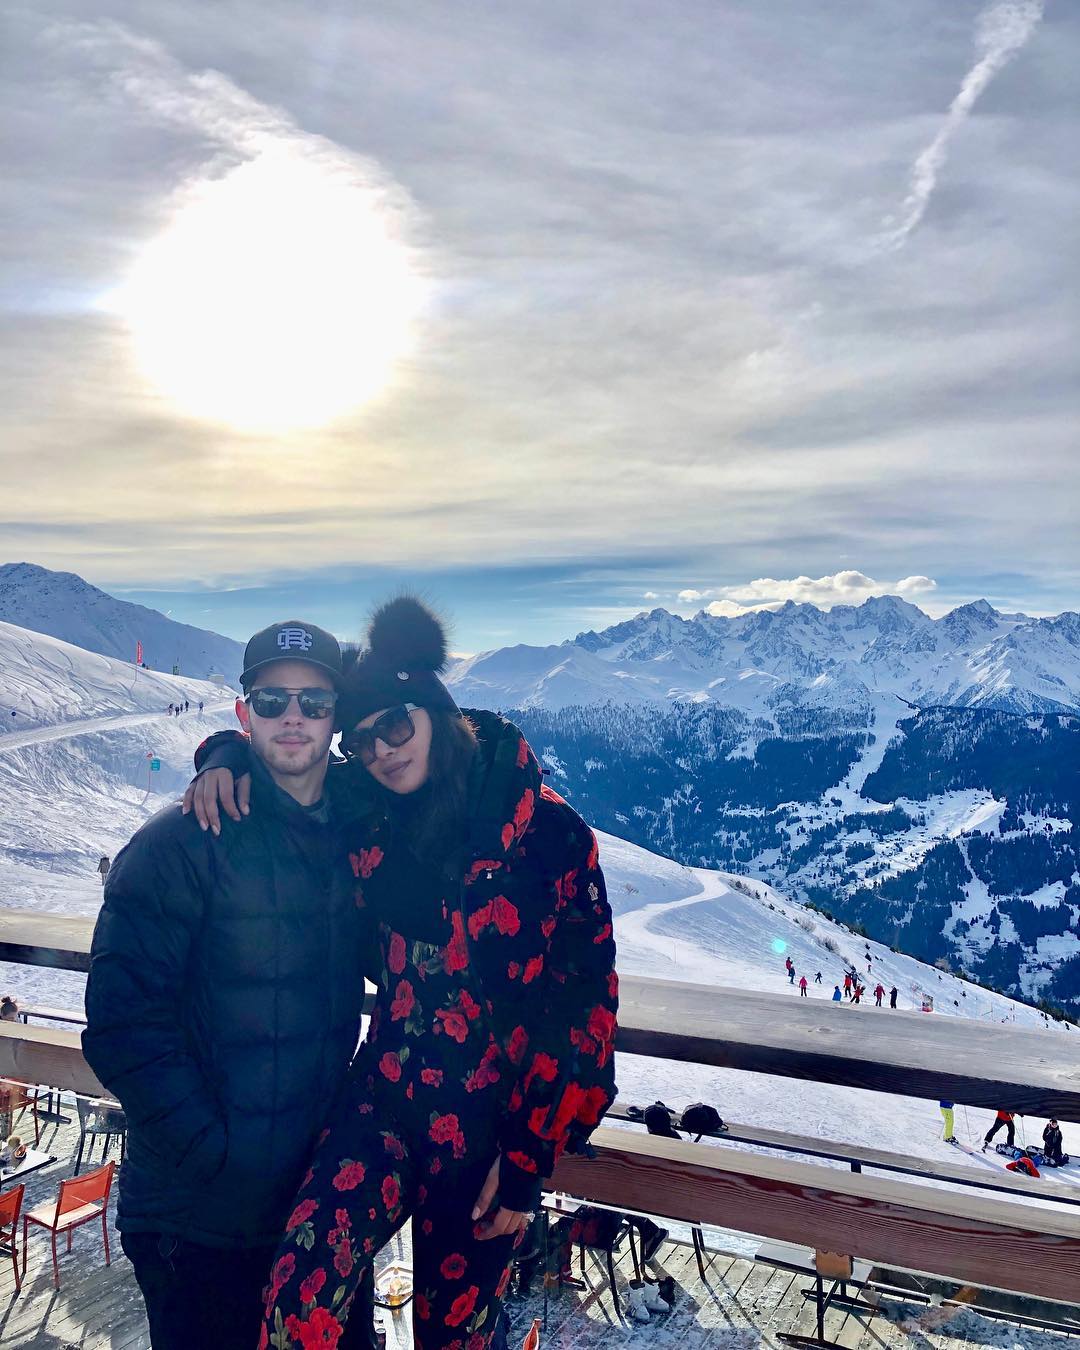 Take A Look At How Priyanka Chopra and Nick Jonas Welcome New Year With A Kiss In Switzerland